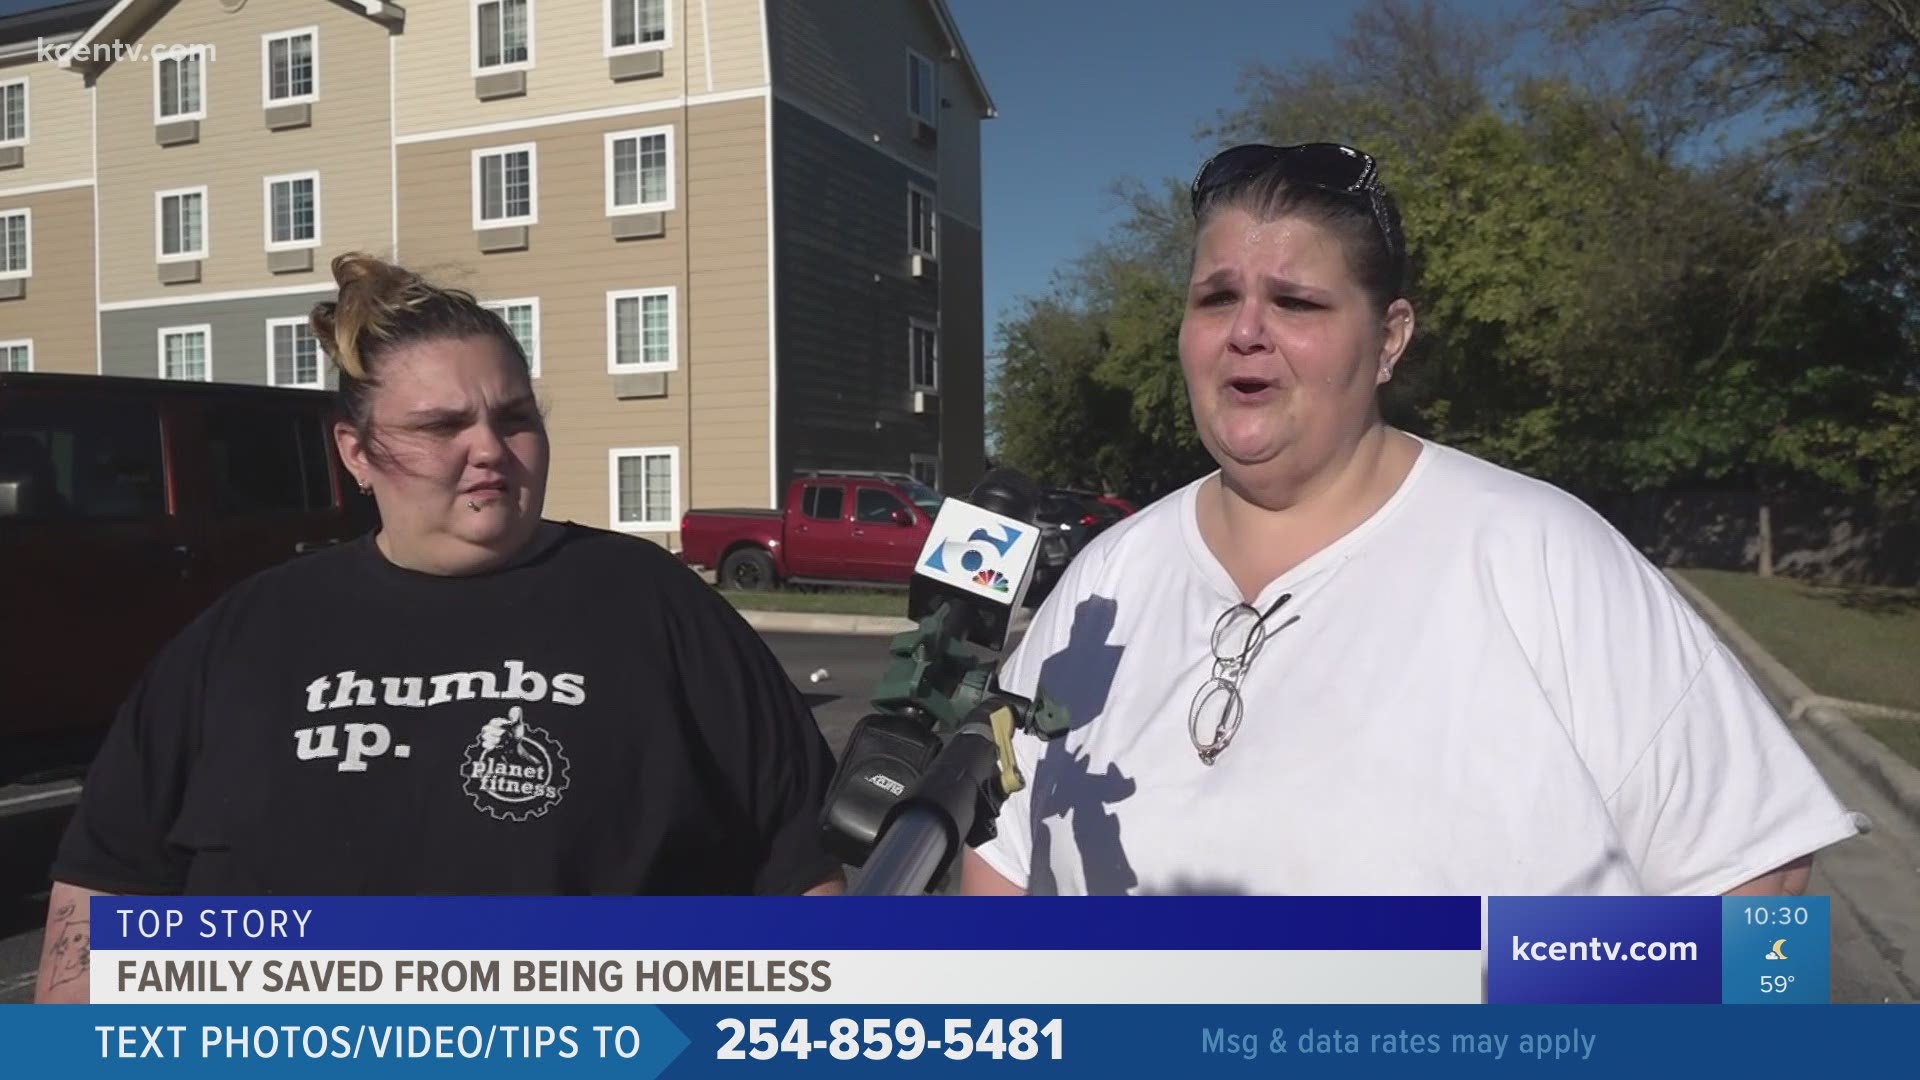 A mother and daughter feared they might have to sleep in a tent after their house burned down. However, a kind stranger stepped up and offered a place for the two.